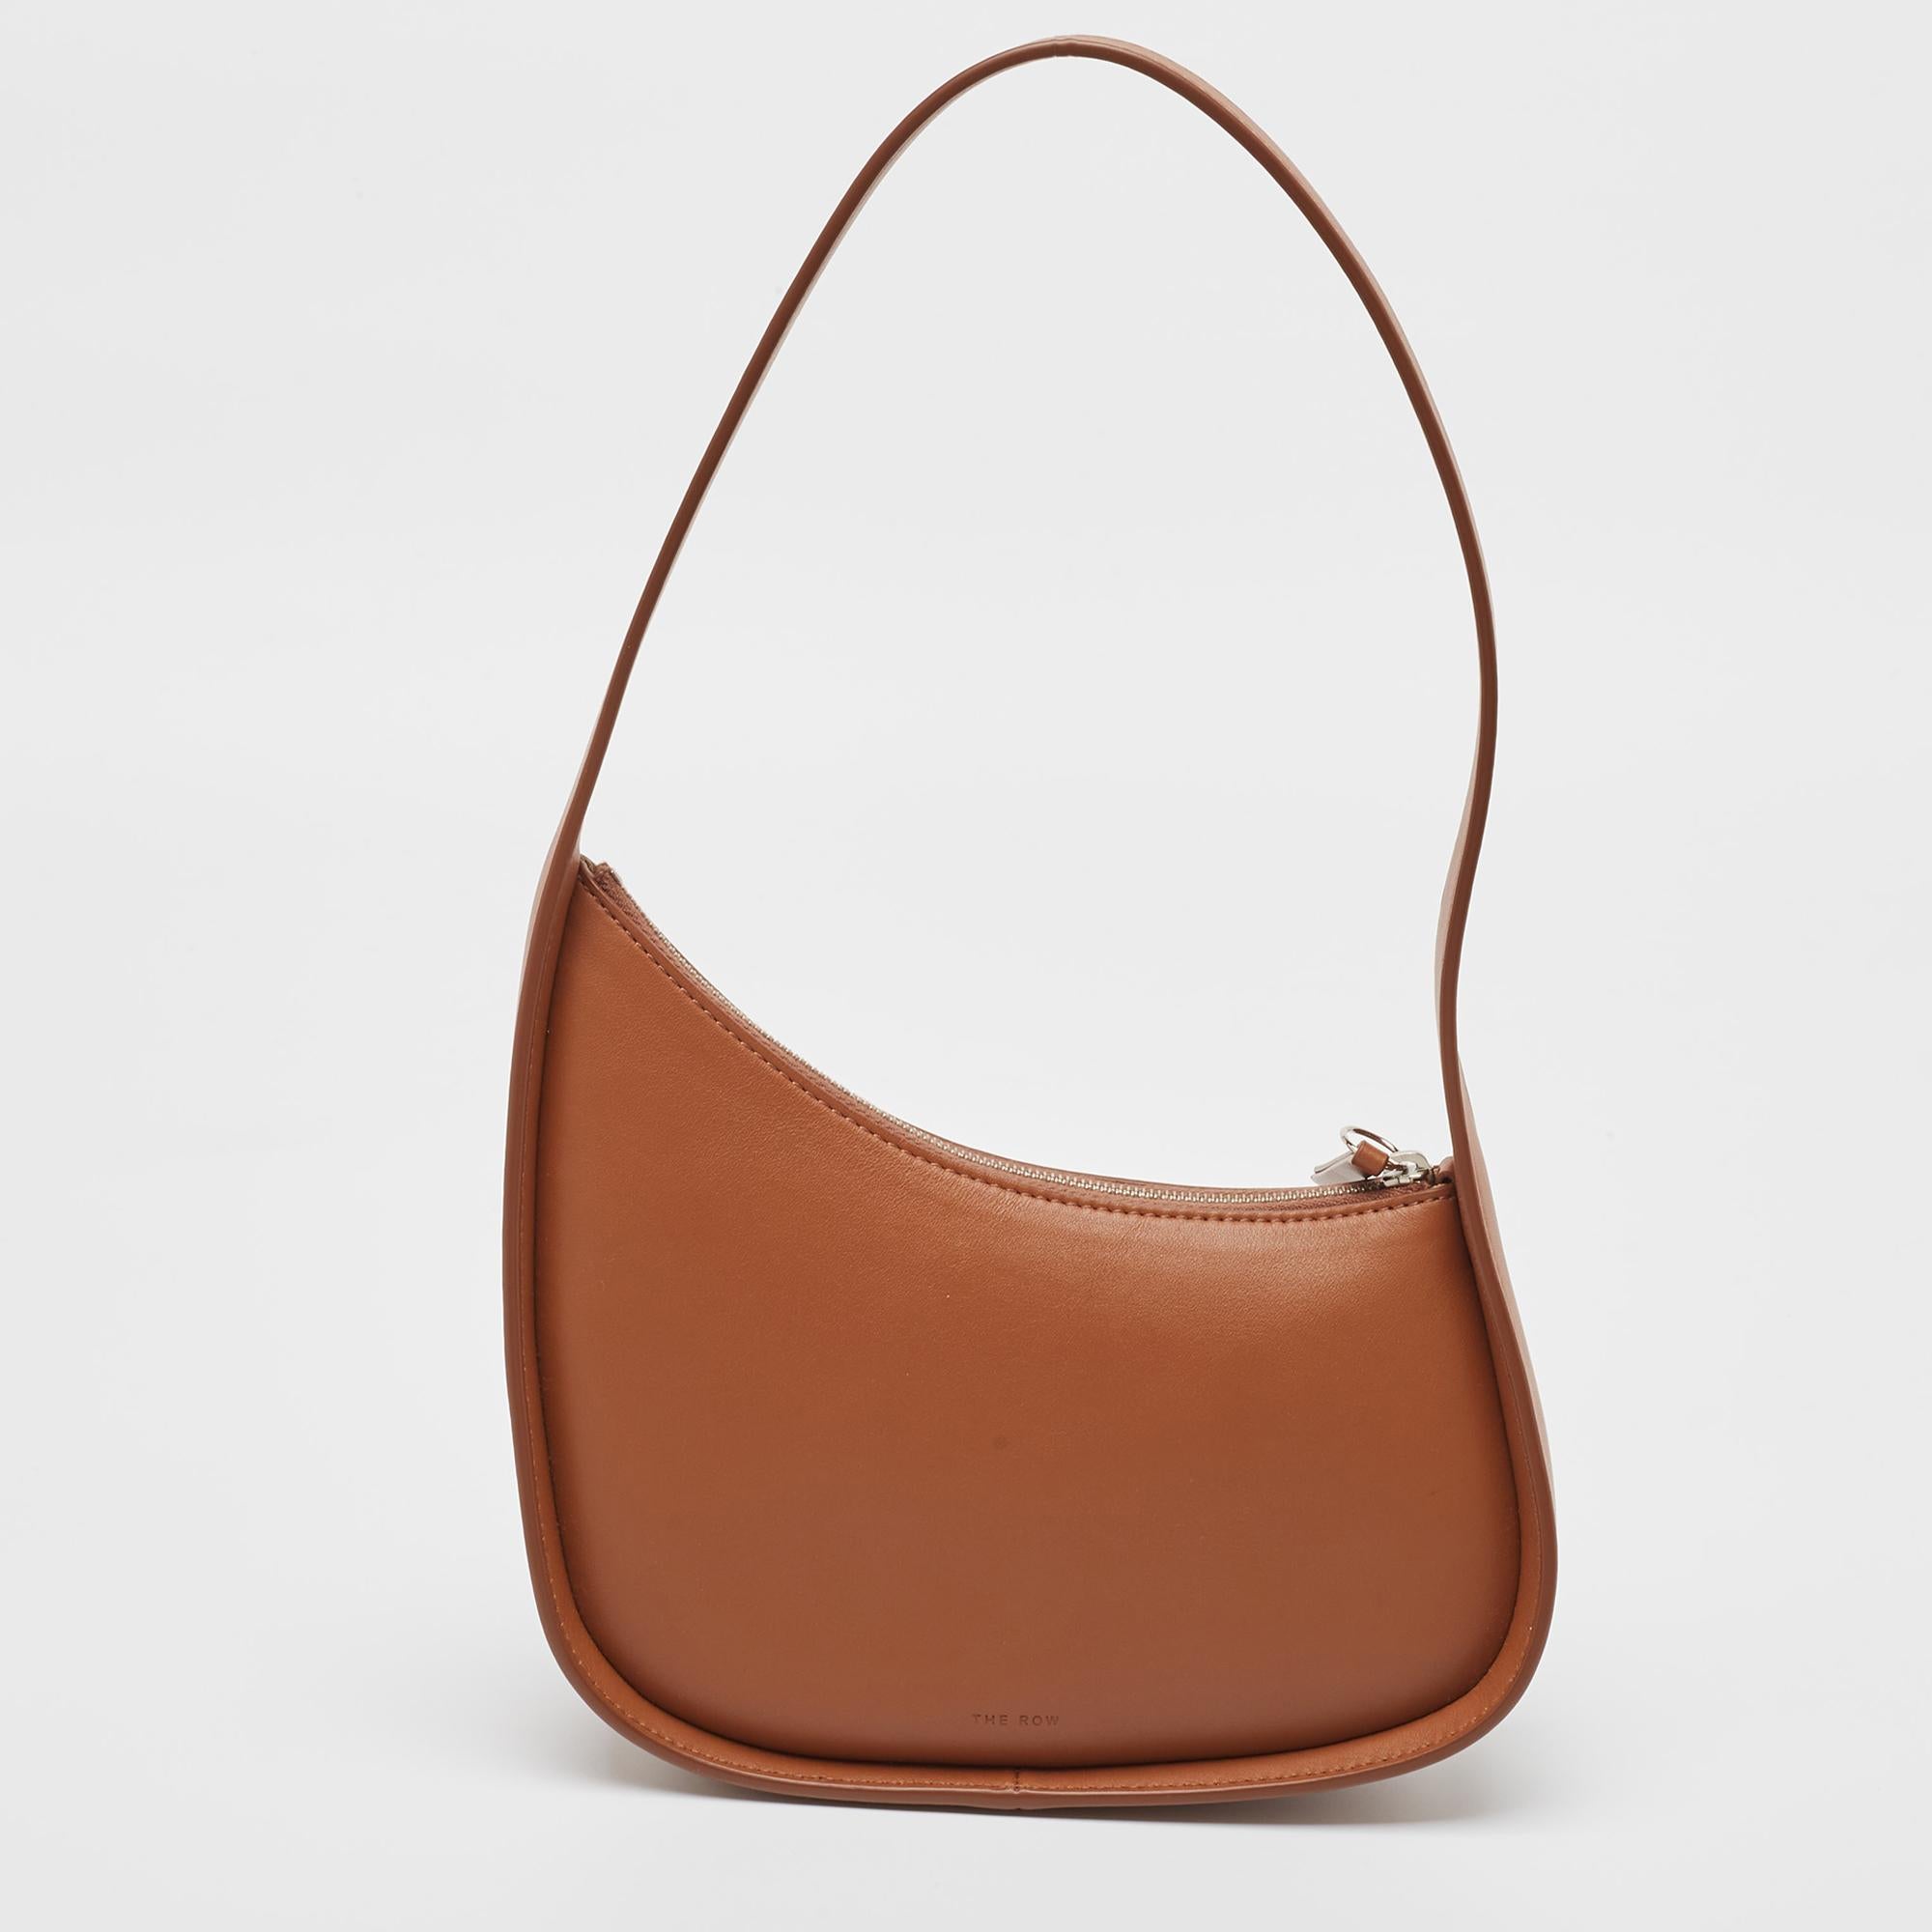 Experience fine craftsmanship with this immaculately designed leather bag by The Row. It has a half-moon shape with a single handle and a suede interior.

Includes: Original Dustbag